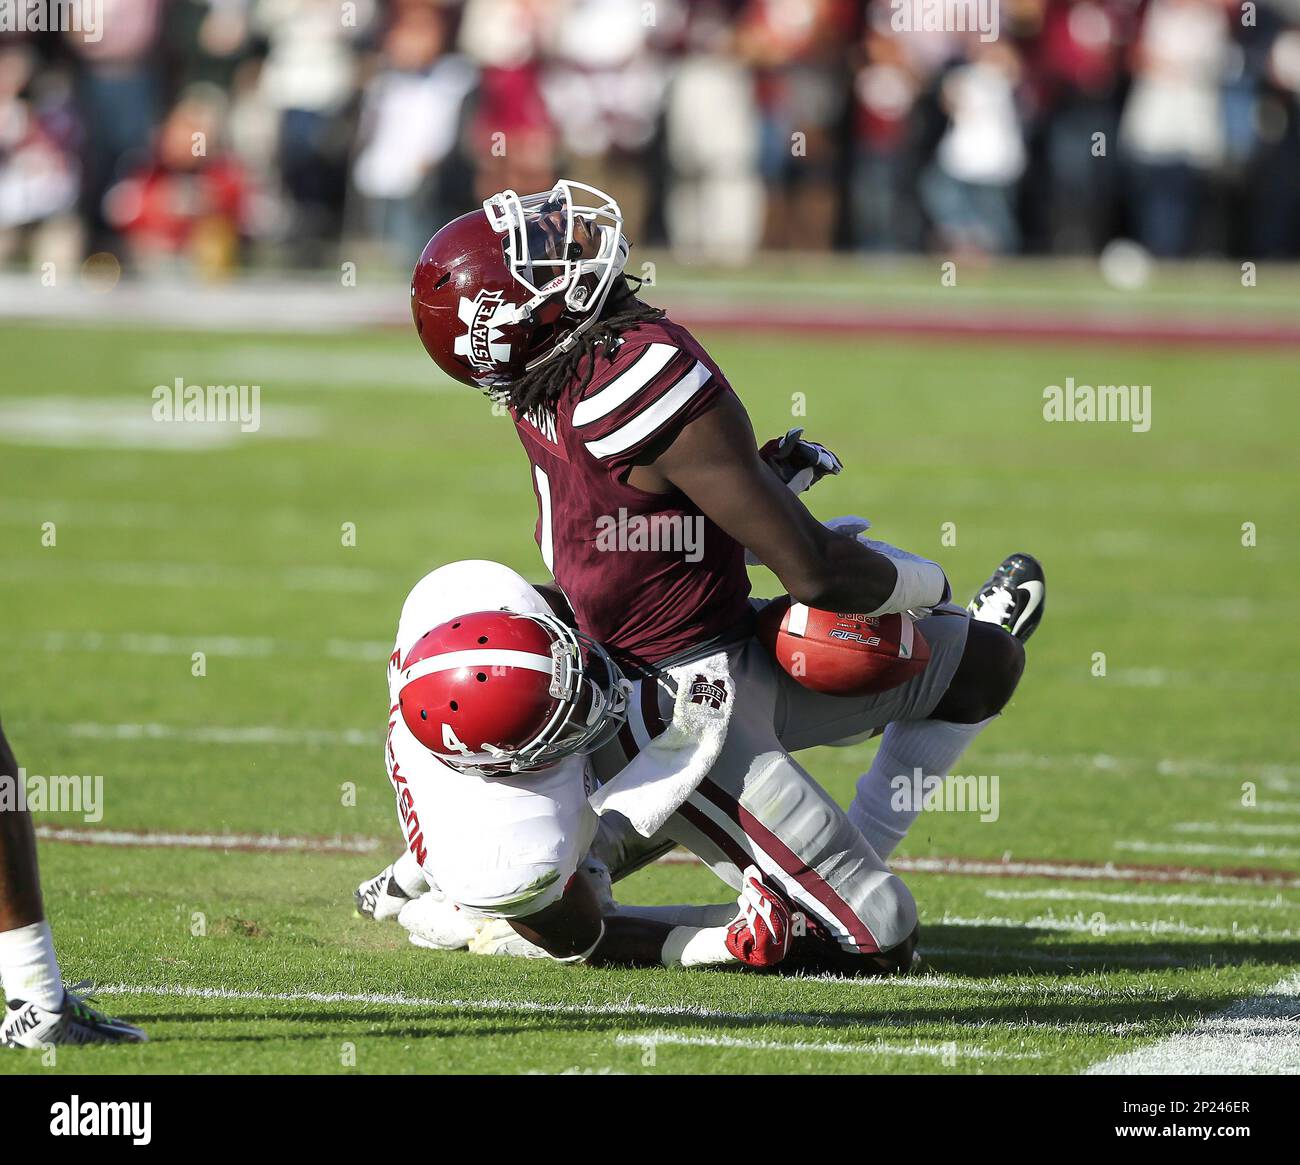 November 14, 2015: Mississippi State WR, De'Runnya Wilson catches a pass  during the NCAA Football game between the Mississippi State Bulldogs and  the Alabama Crimson Tide at Davis Wade Stadium in Starkville,